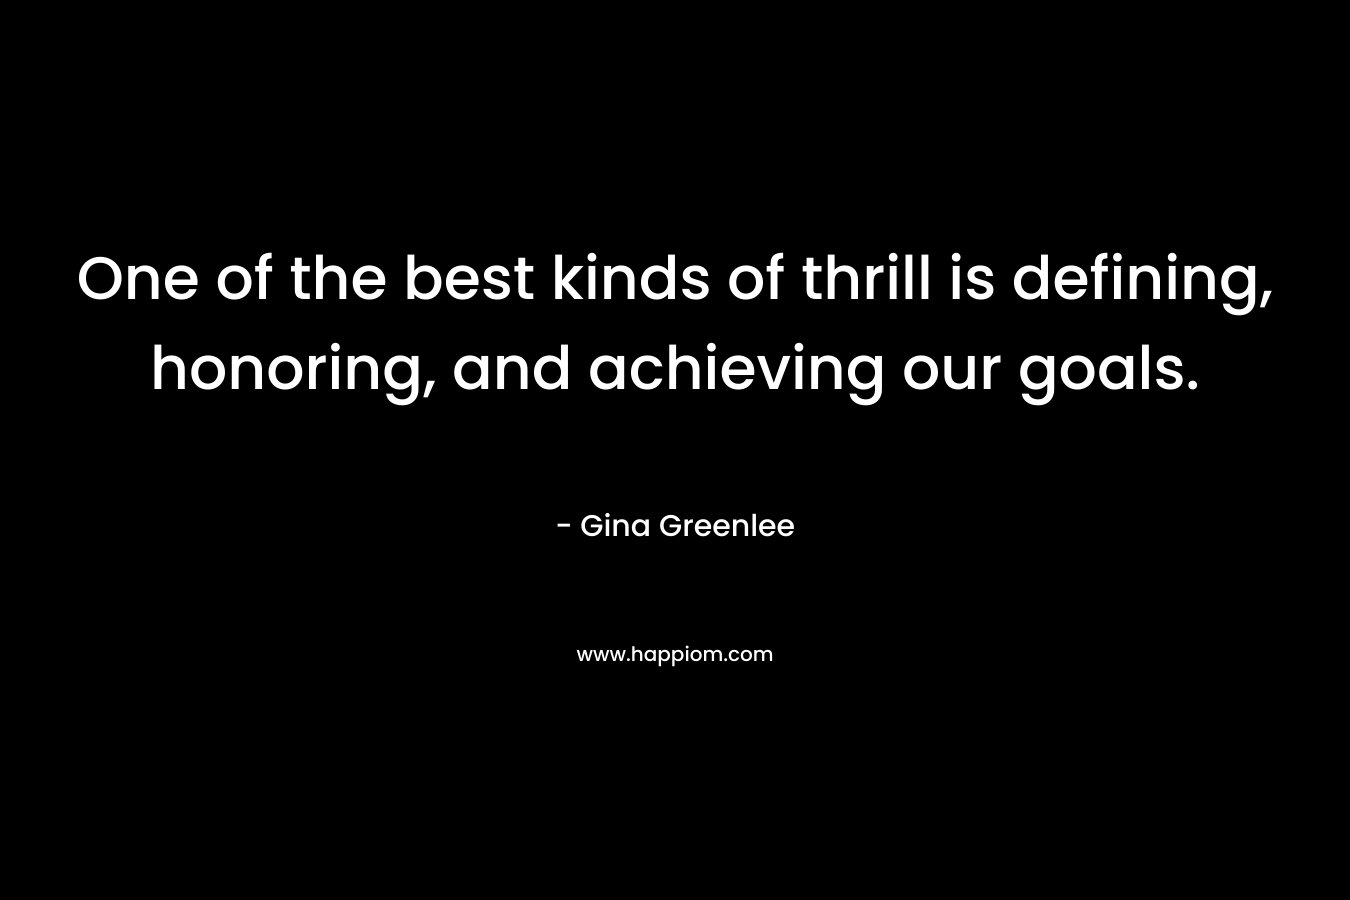 One of the best kinds of thrill is defining, honoring, and achieving our goals. – Gina Greenlee